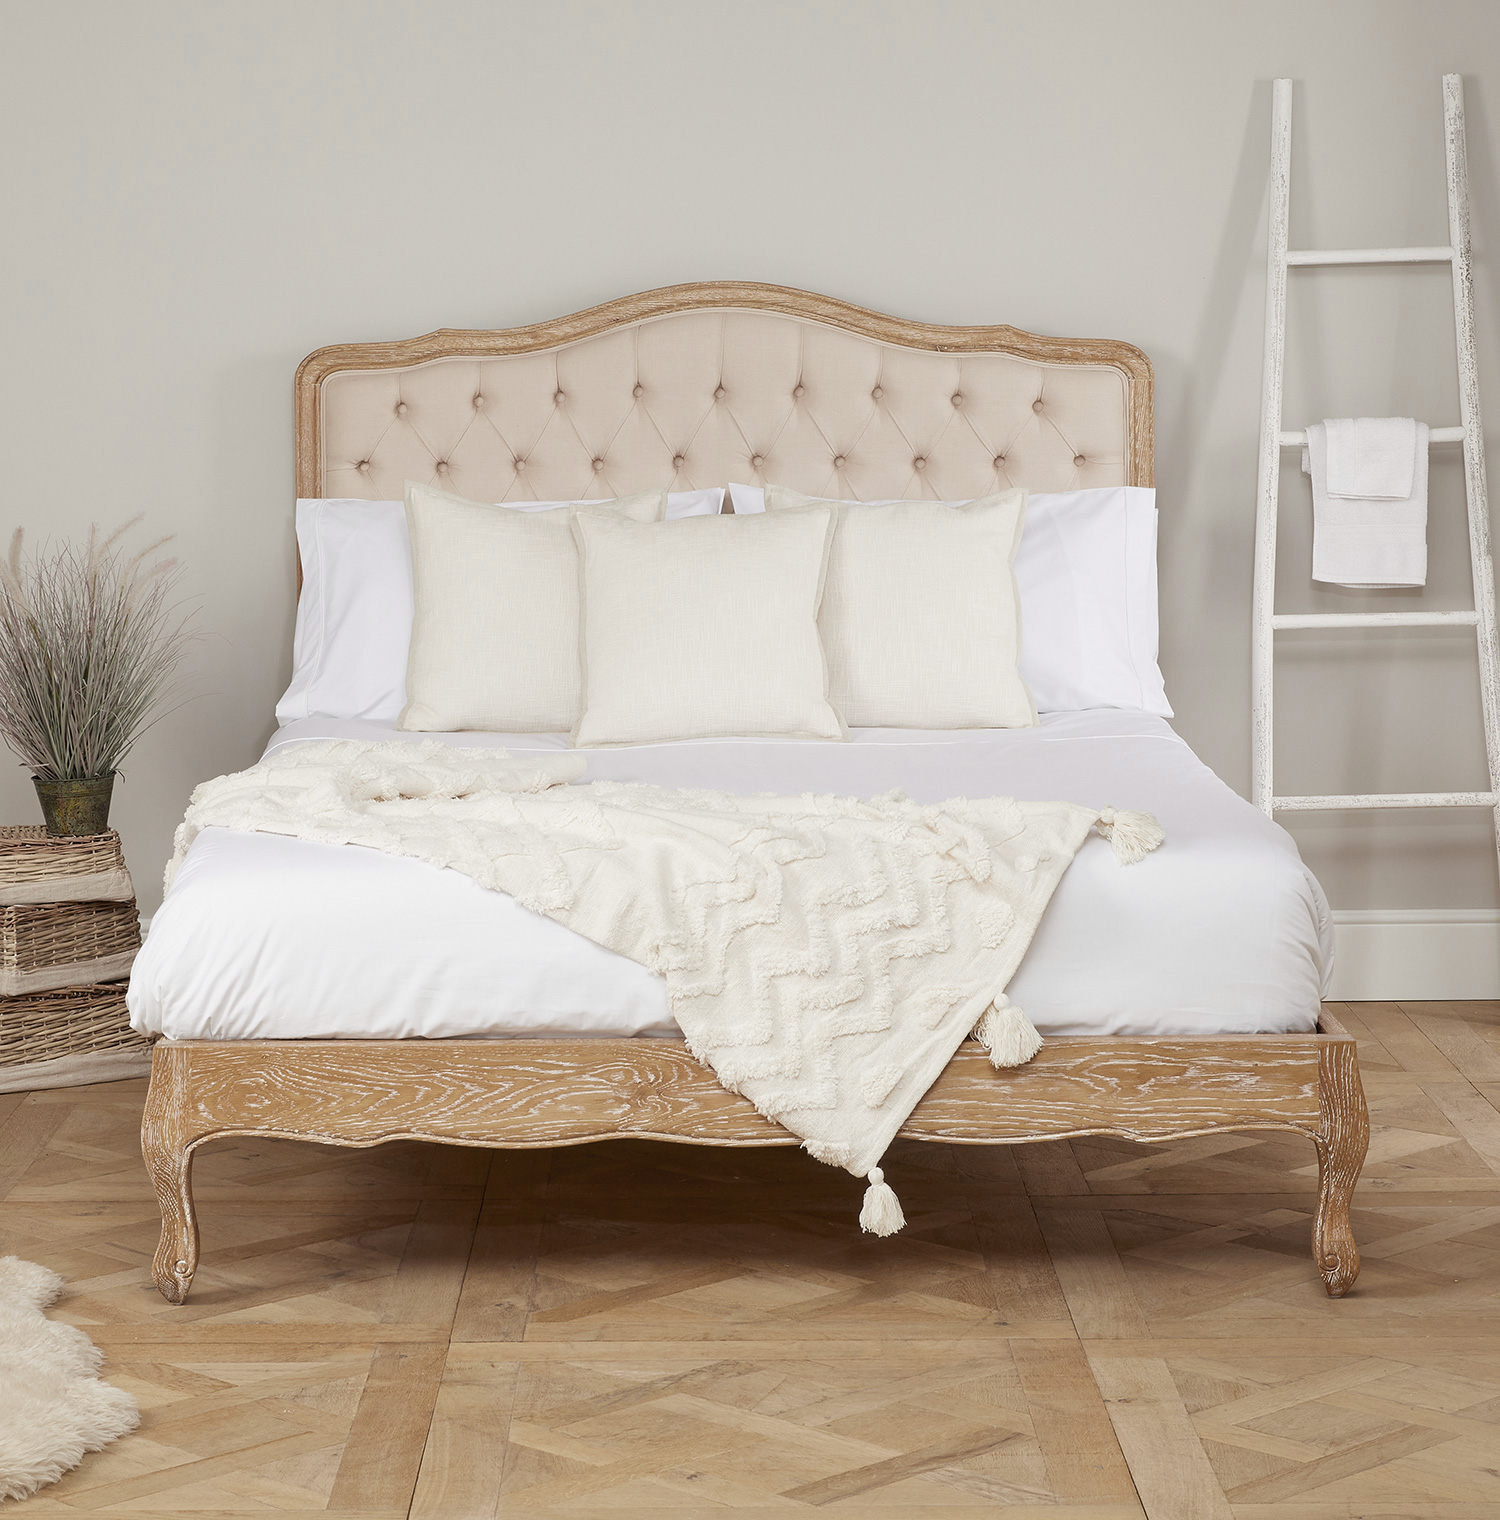 Eléa French Weathered Limed Oak Upholstered Button Back Low Foot Board Bed – Double Size